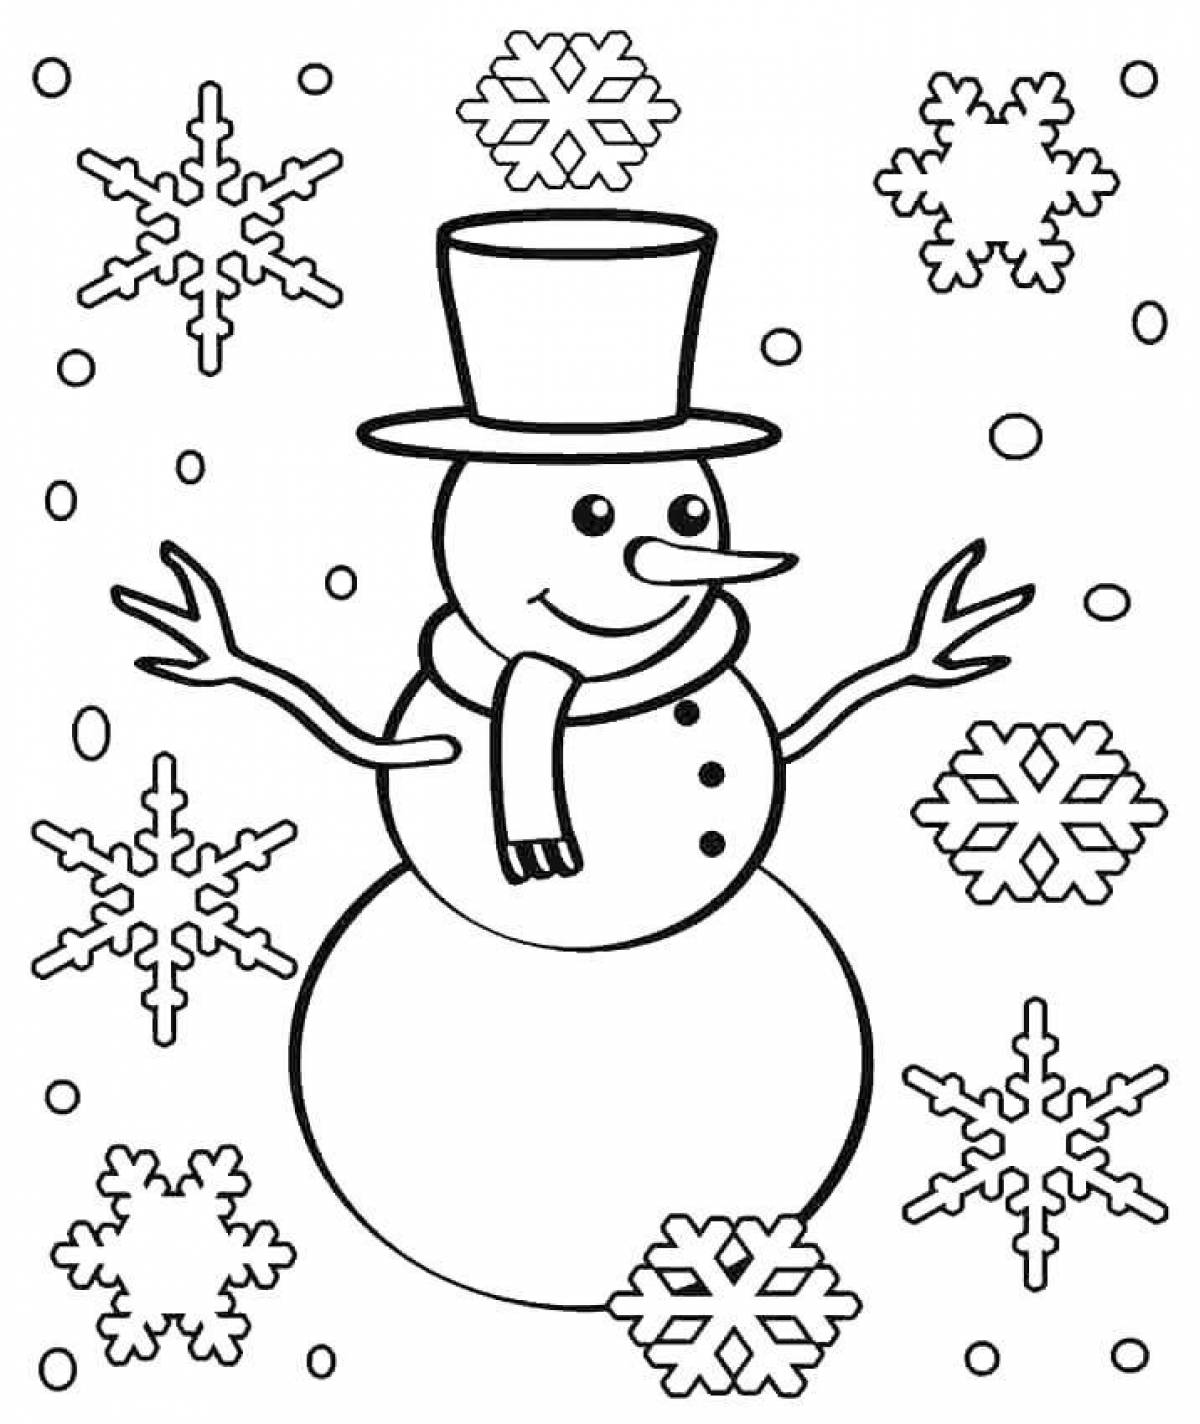 Amazing tree and snowman coloring book